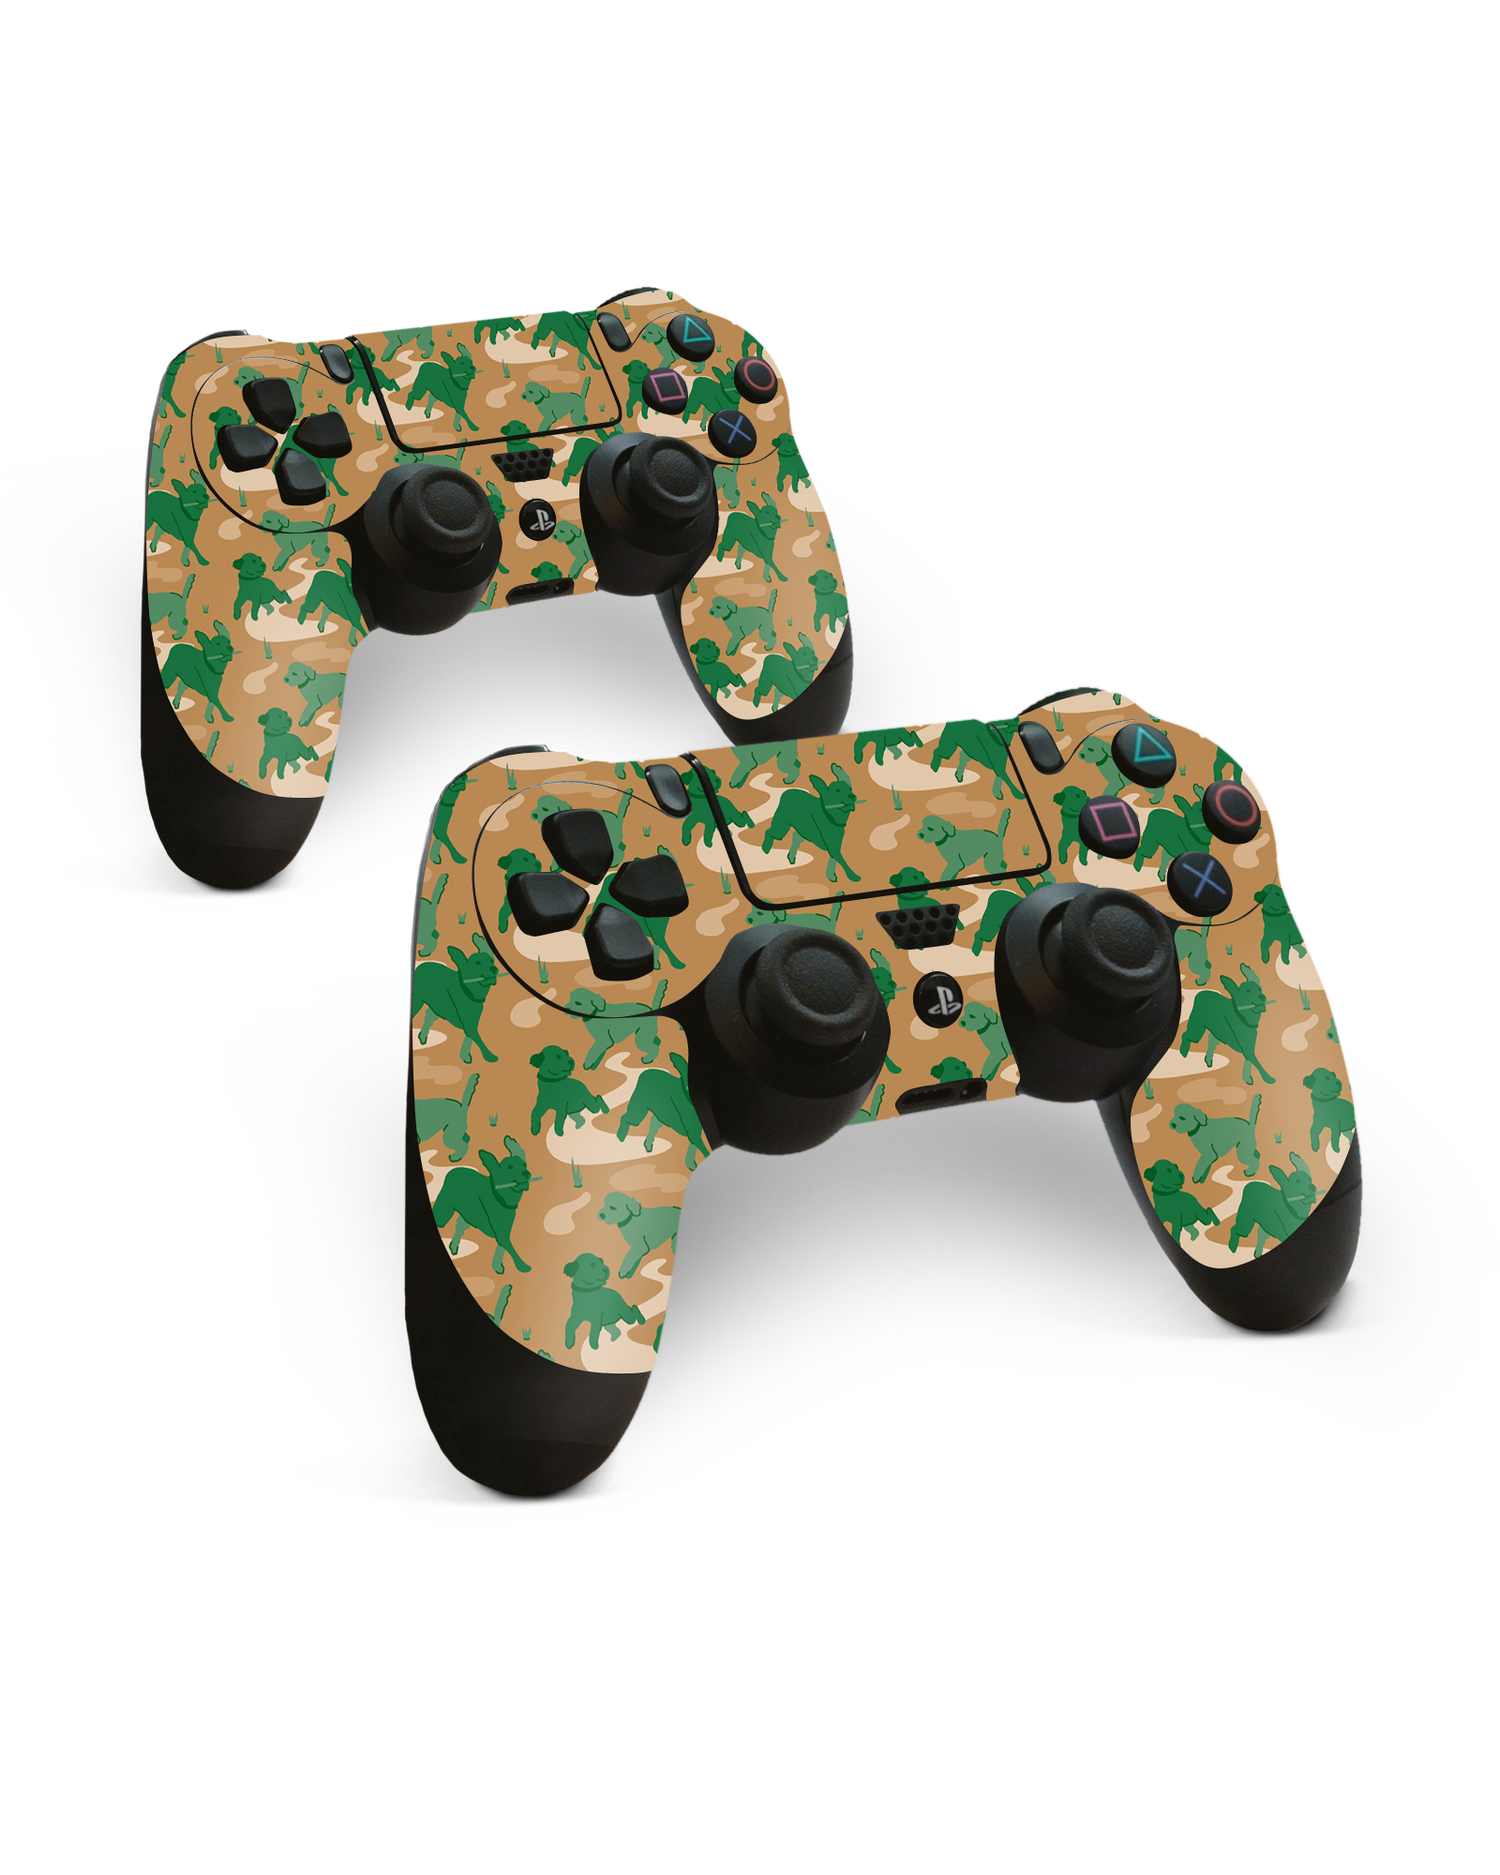 Dog Camo Console Skin for Sony PlayStation 4 Controller: Side View